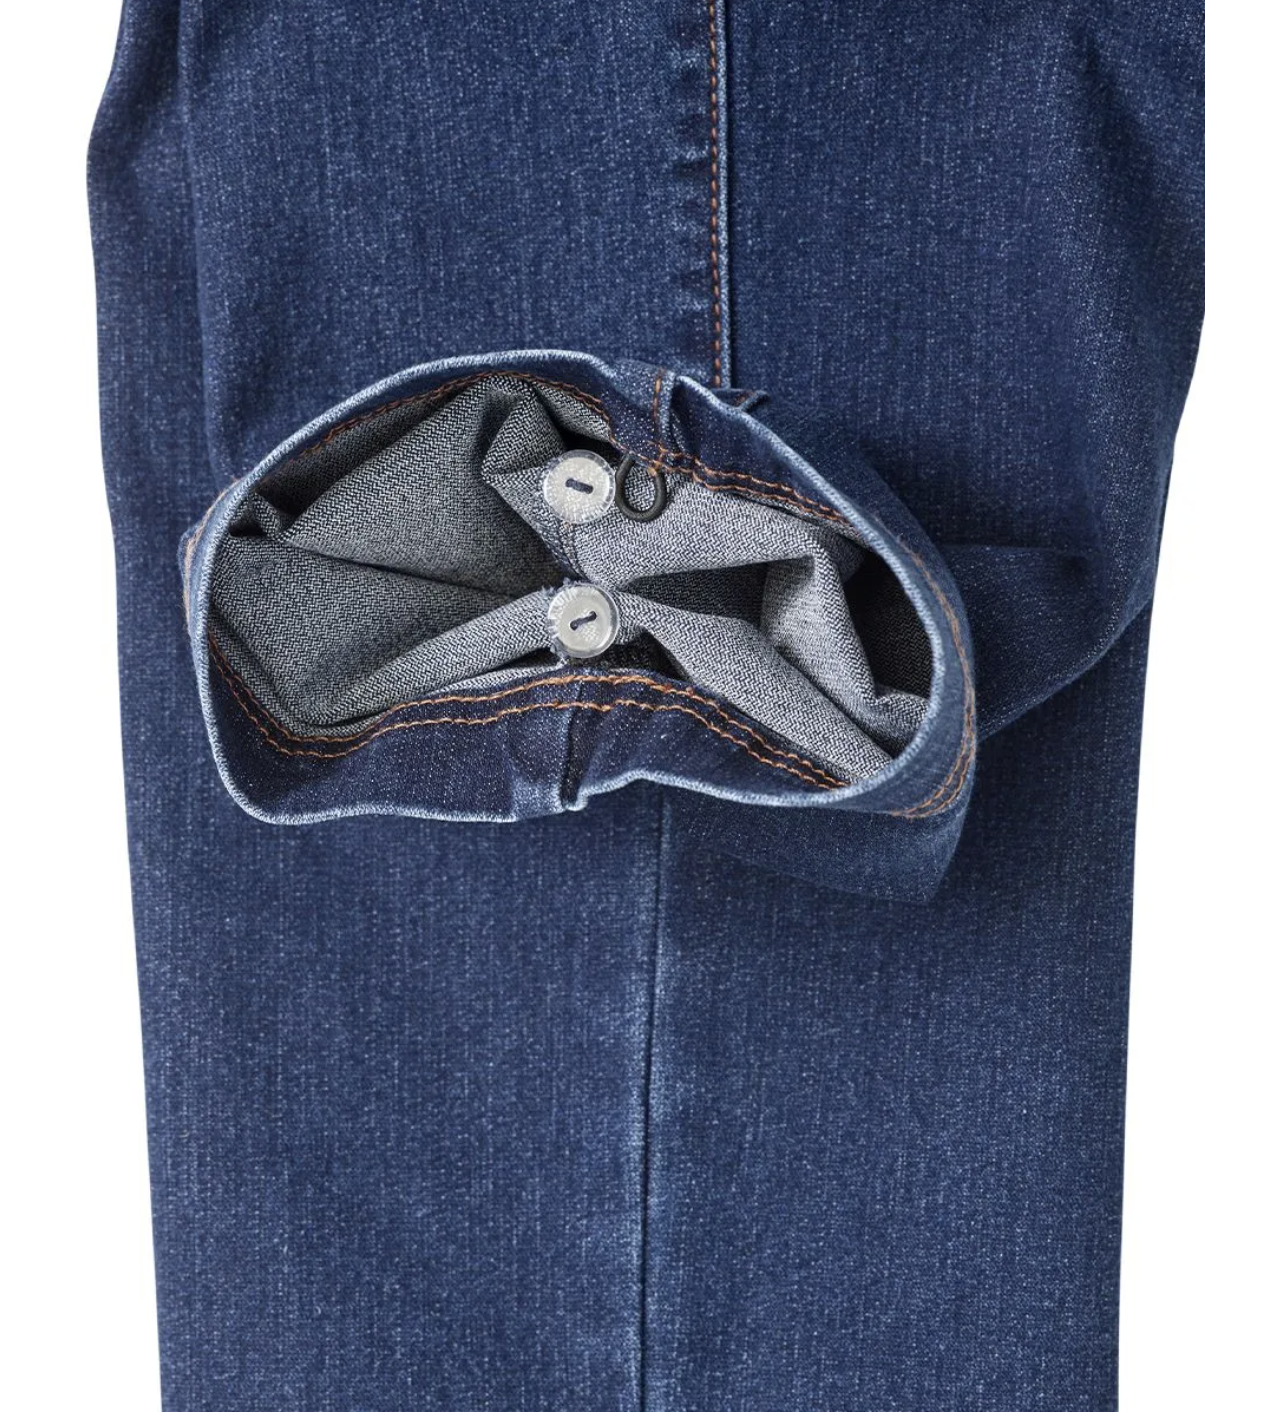 Women's Jeans for Wheelchair Users | Art in Aging